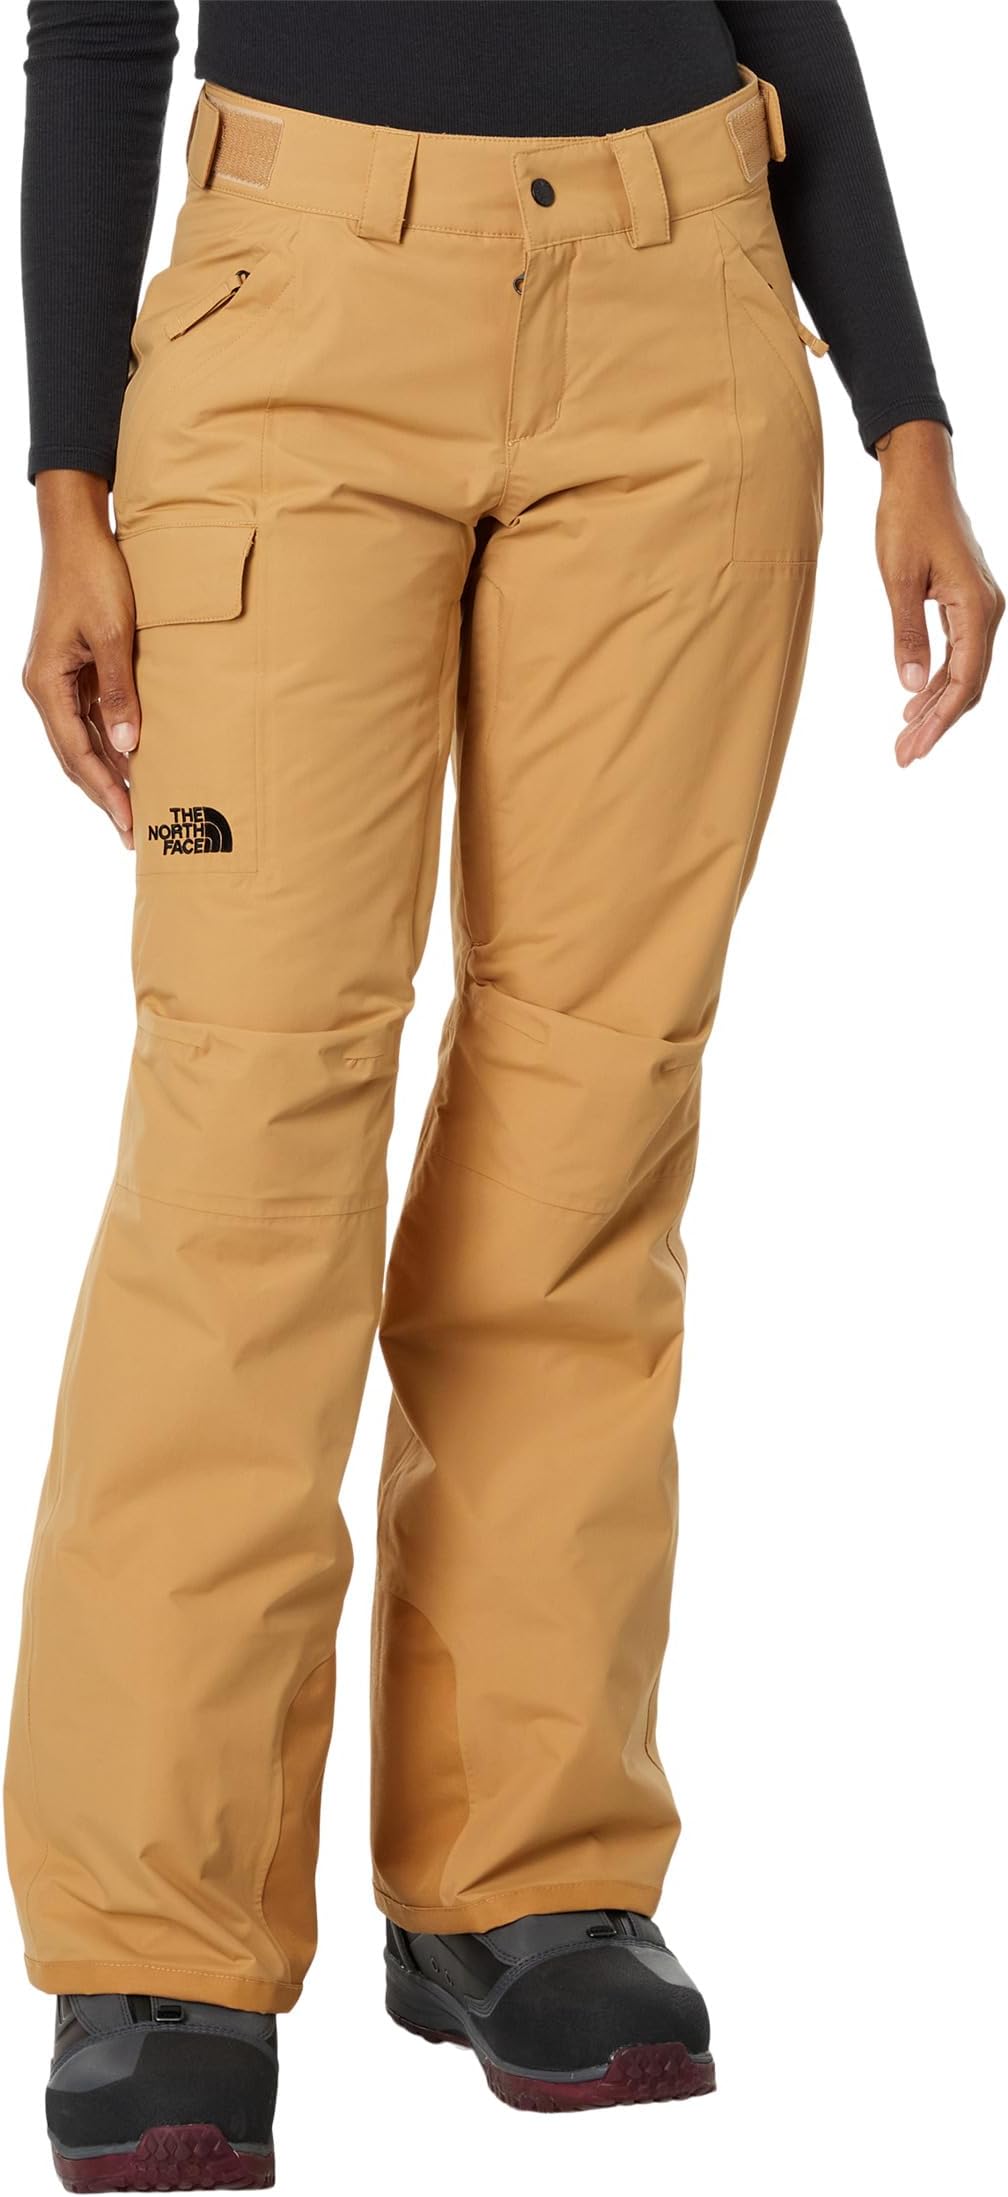 Брюки Freedom Insulated Pants The North Face, цвет Almond Butter куртка the north face heritage stuffed coach цвет almond butter